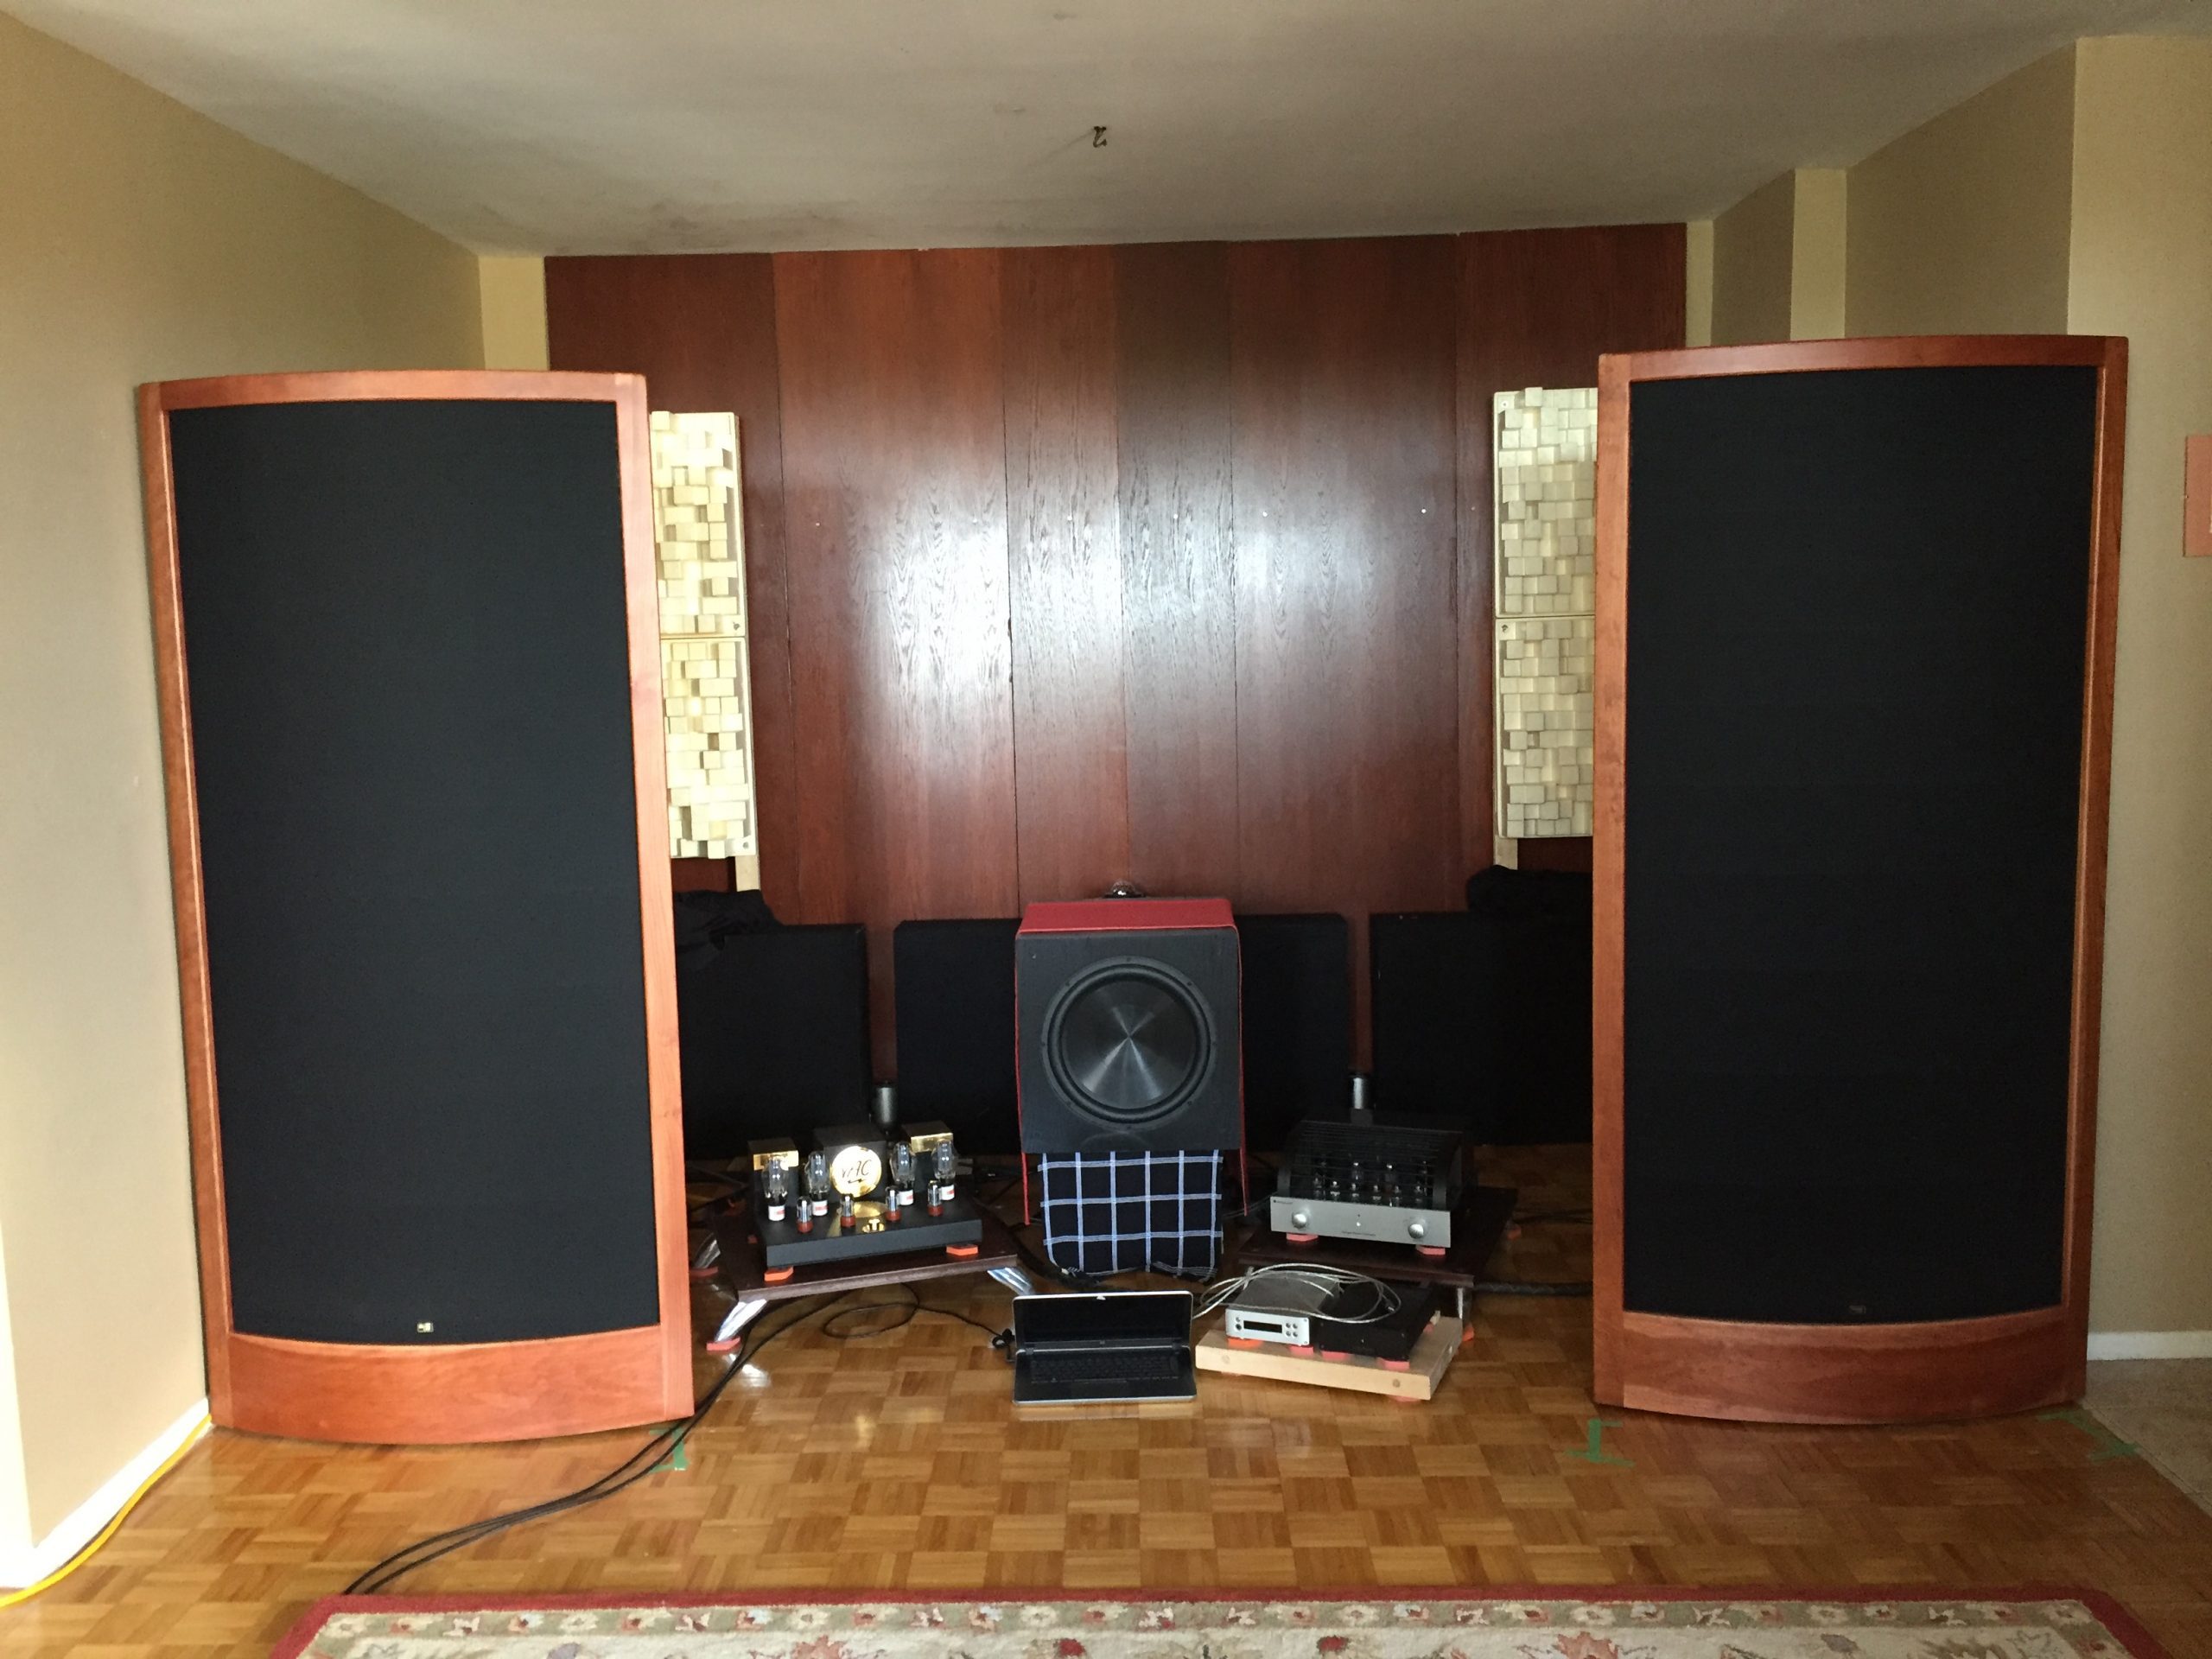 How to Correctly Integrate Subwoofers Into a Stereo System, Part 1